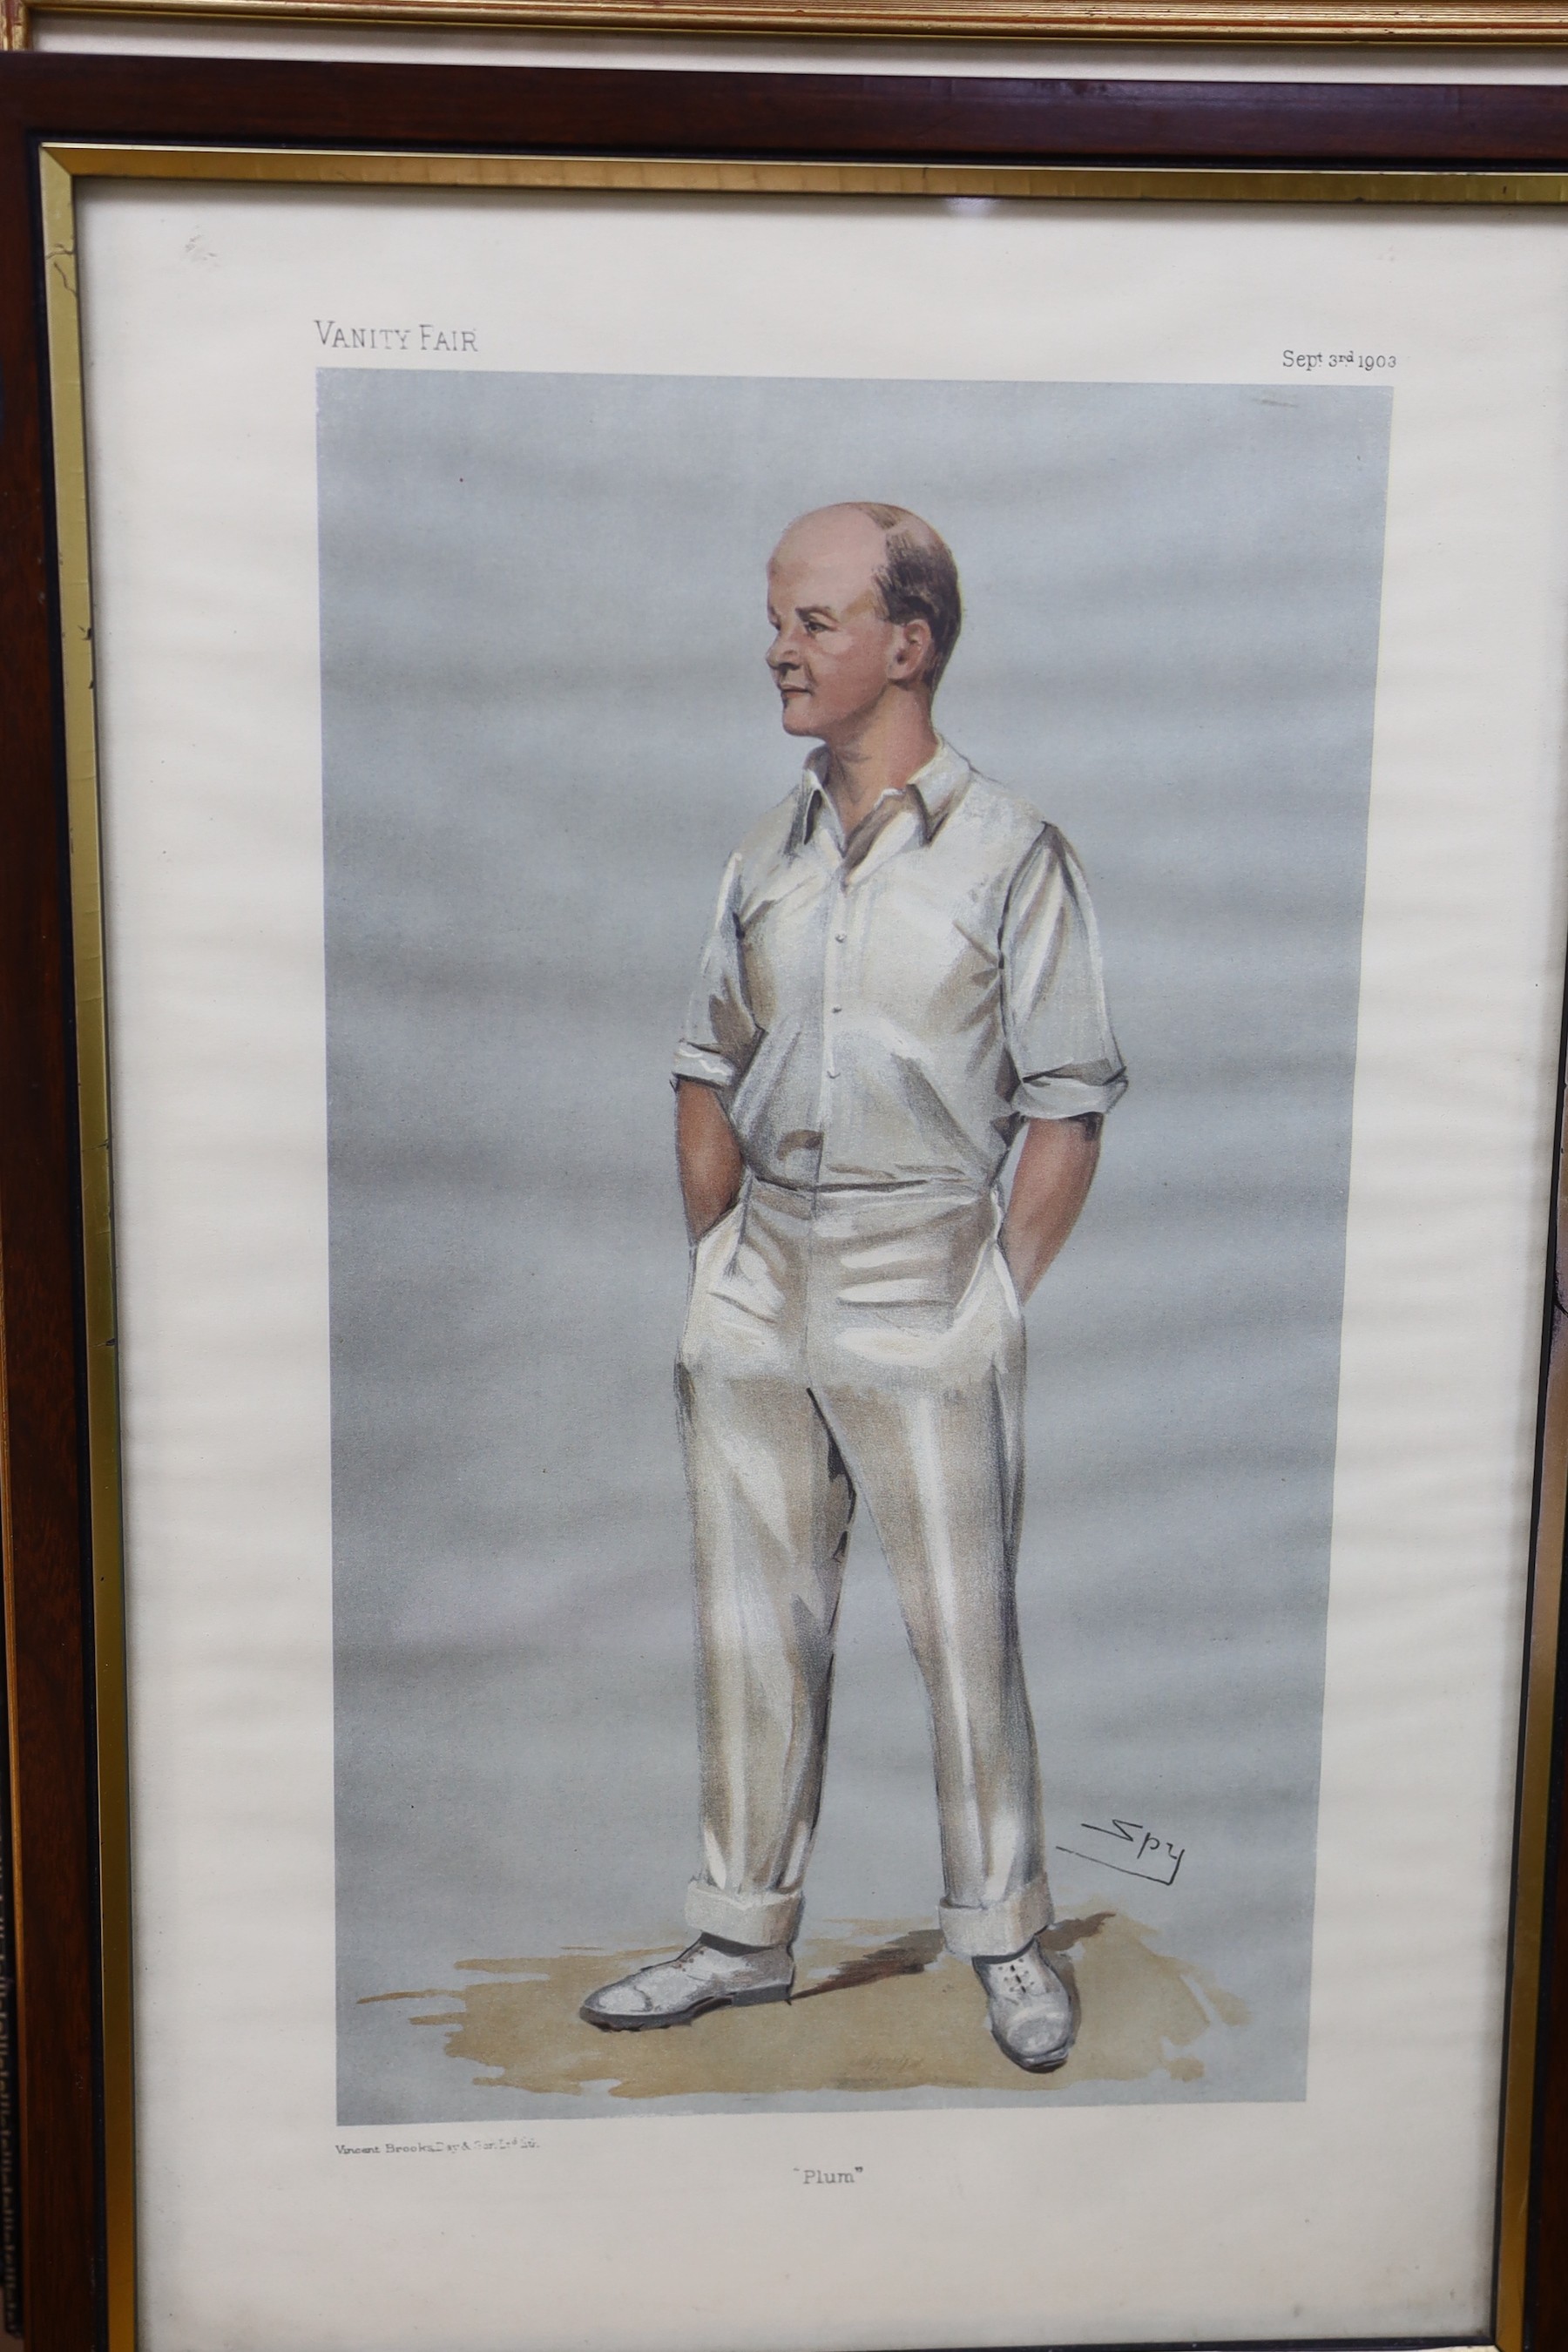 Spy (Vanity Fair), four prints of cricketers, 'July 1901', 'The Champion County', 'Plum' and 'Sammy', largest 40 x 26cm